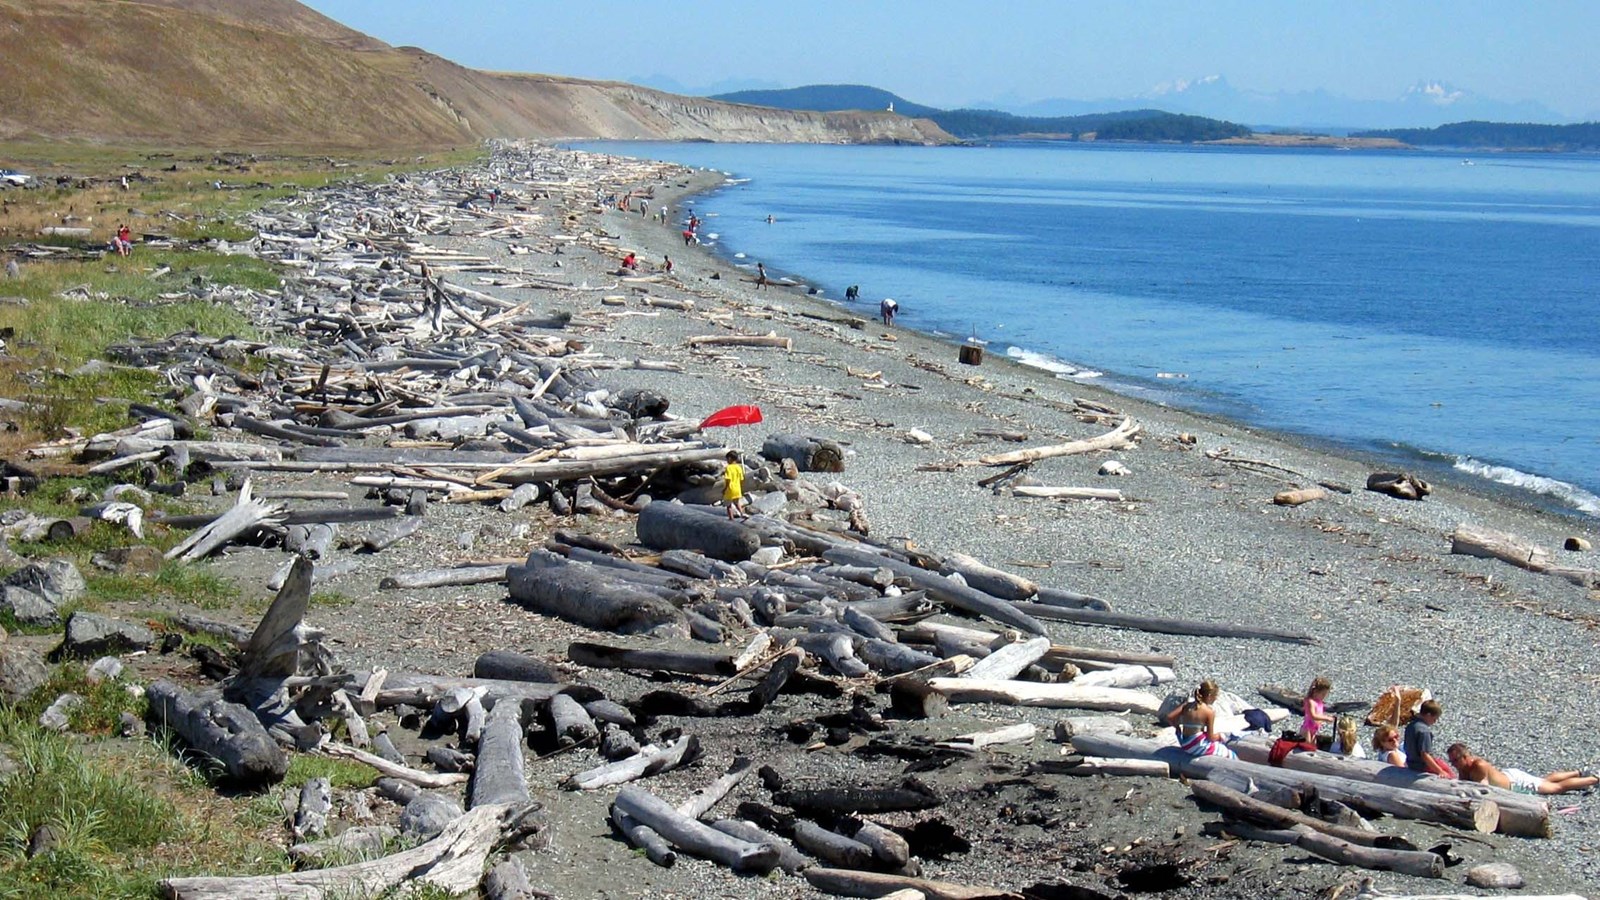 Gray sand beach with lots of large driftwood logs. A group of people are sitting on some of the logs